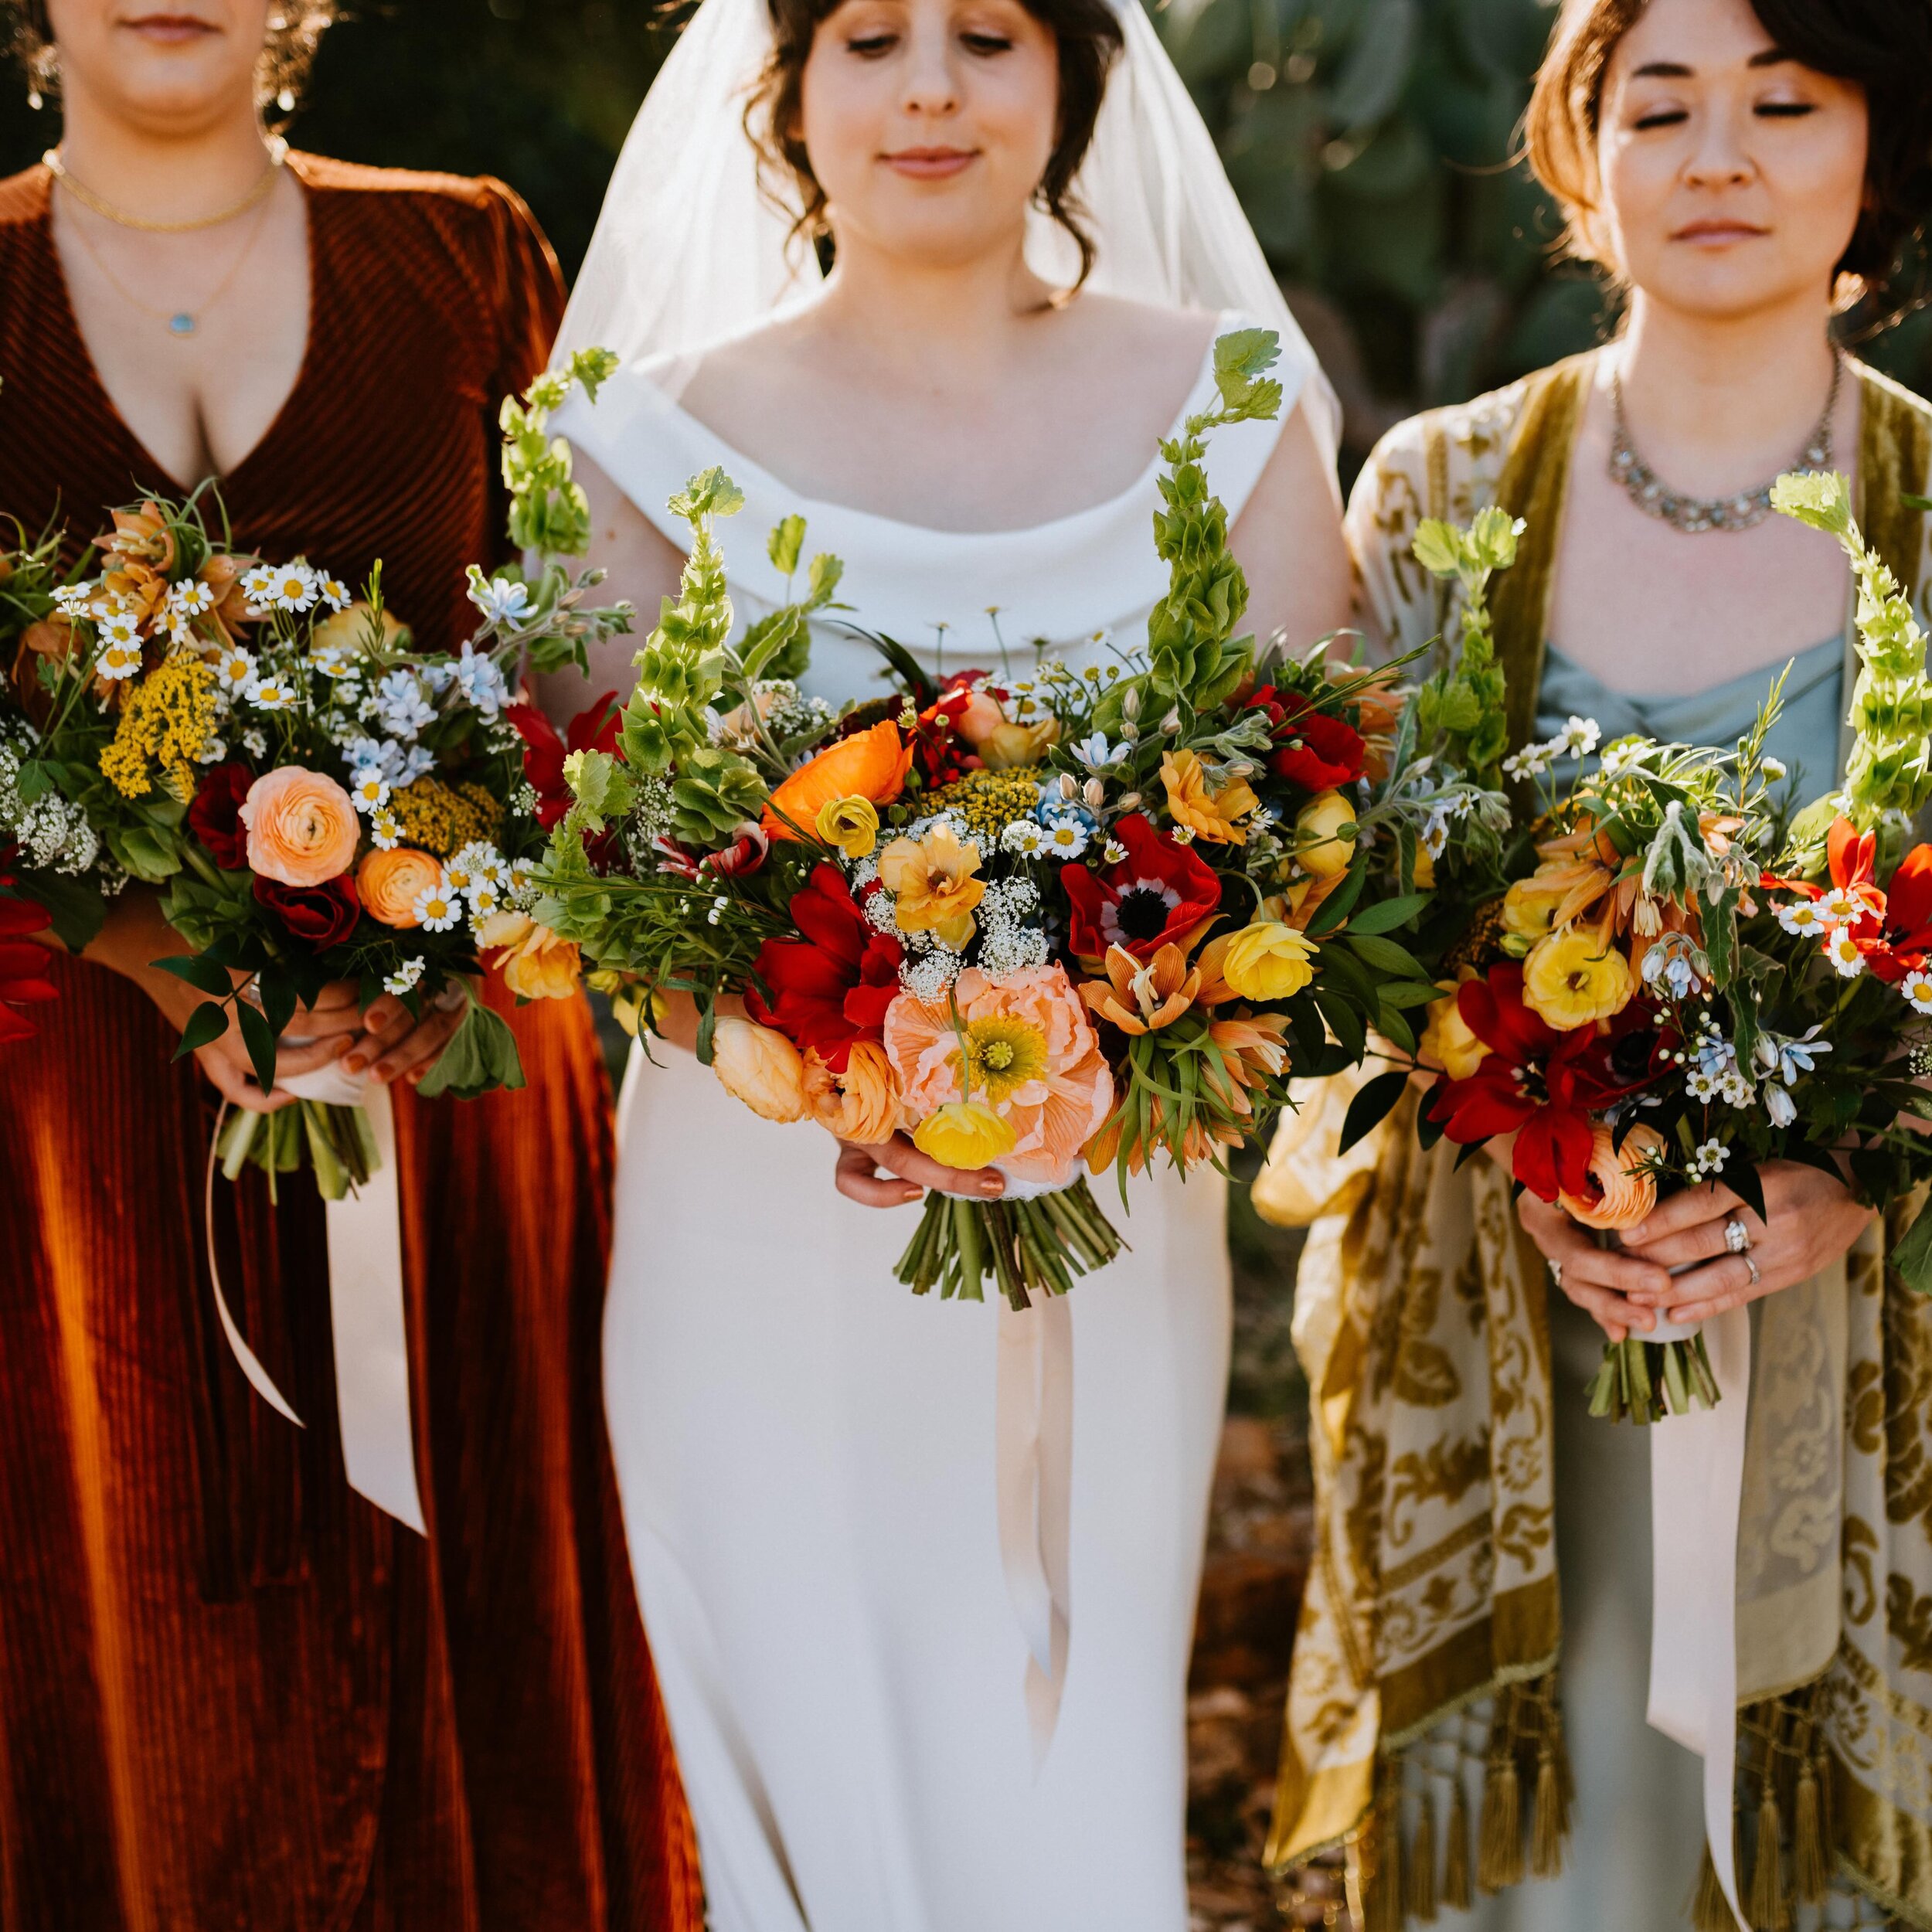 I&rsquo;ve seen a few redbud trees starting to bloom this week, which can only mean one thing- Spring is upon us! This wedding featured so many of my spring faves including poppies, anemones and fritillaria. Do you have a favorite spring bloom? Tell 